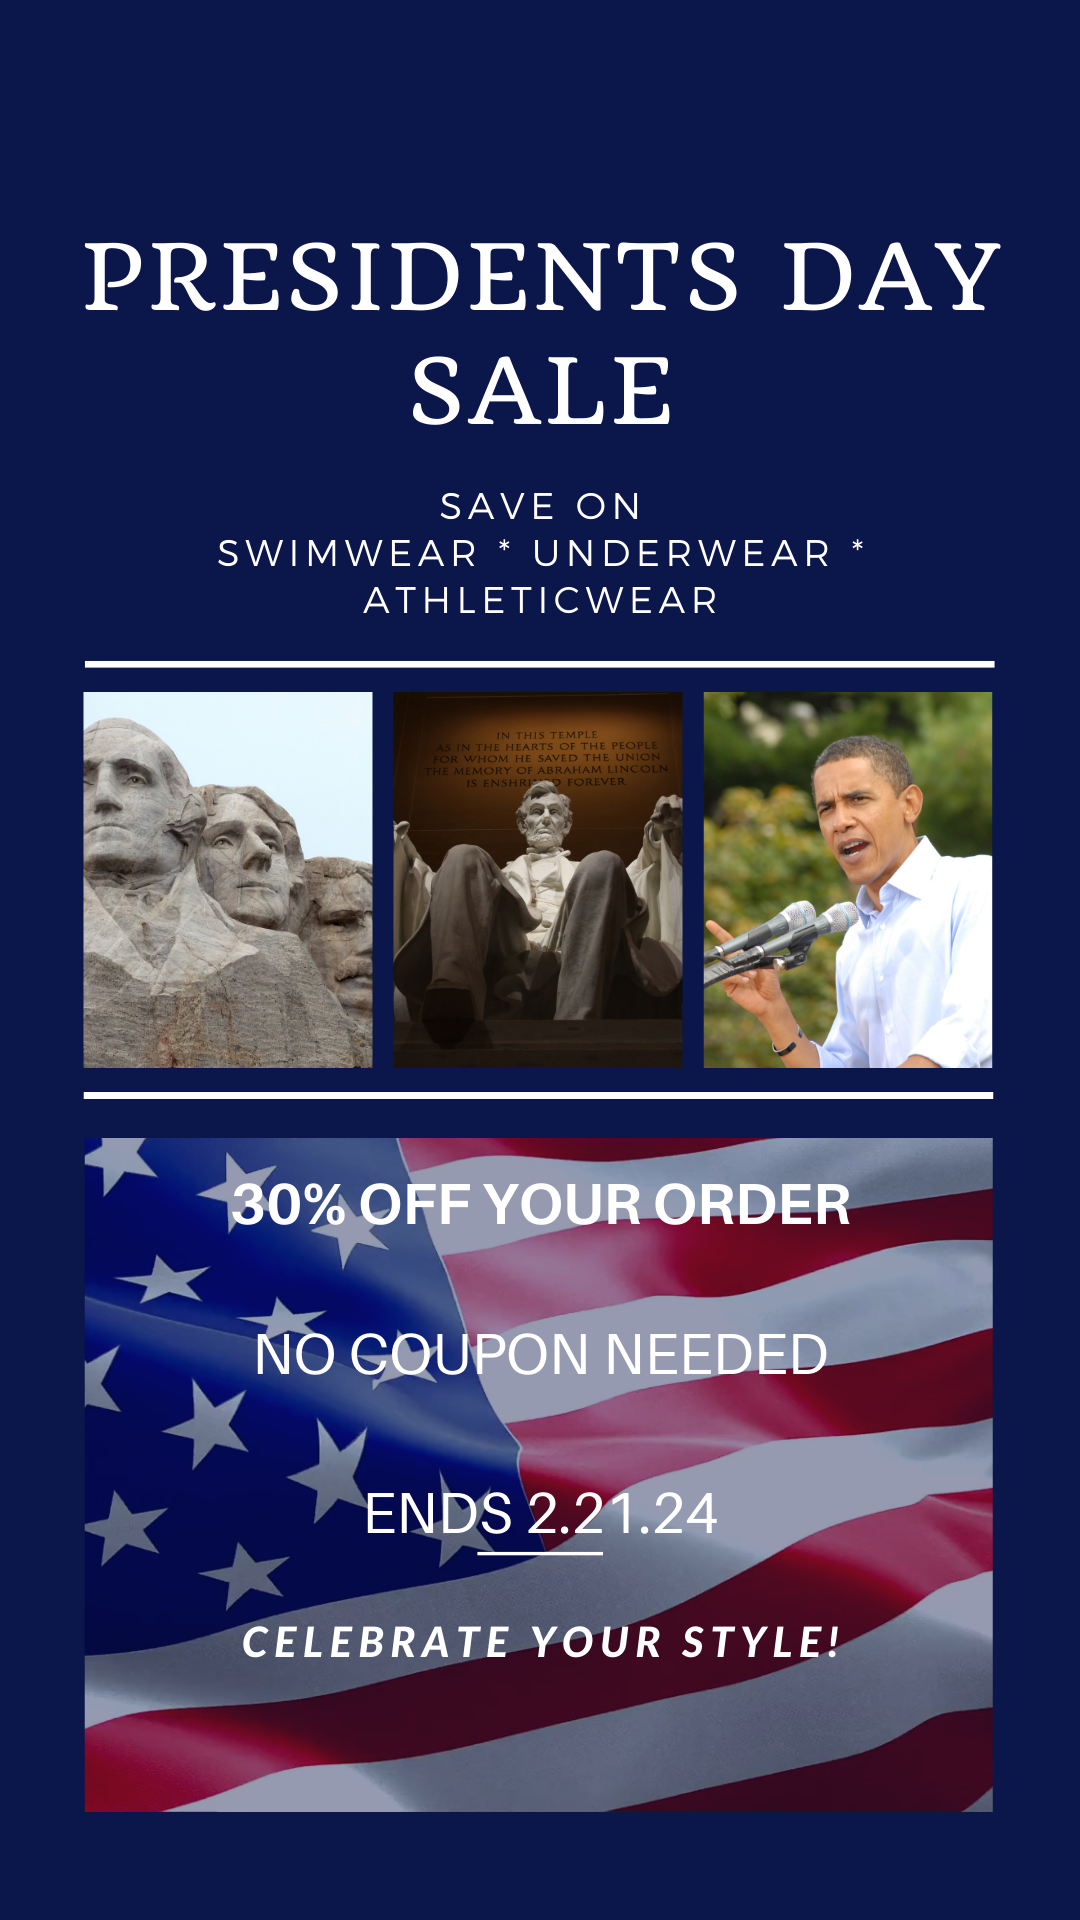 Don't Miss Out on Presidents Day Savings - Shop Now and Save!